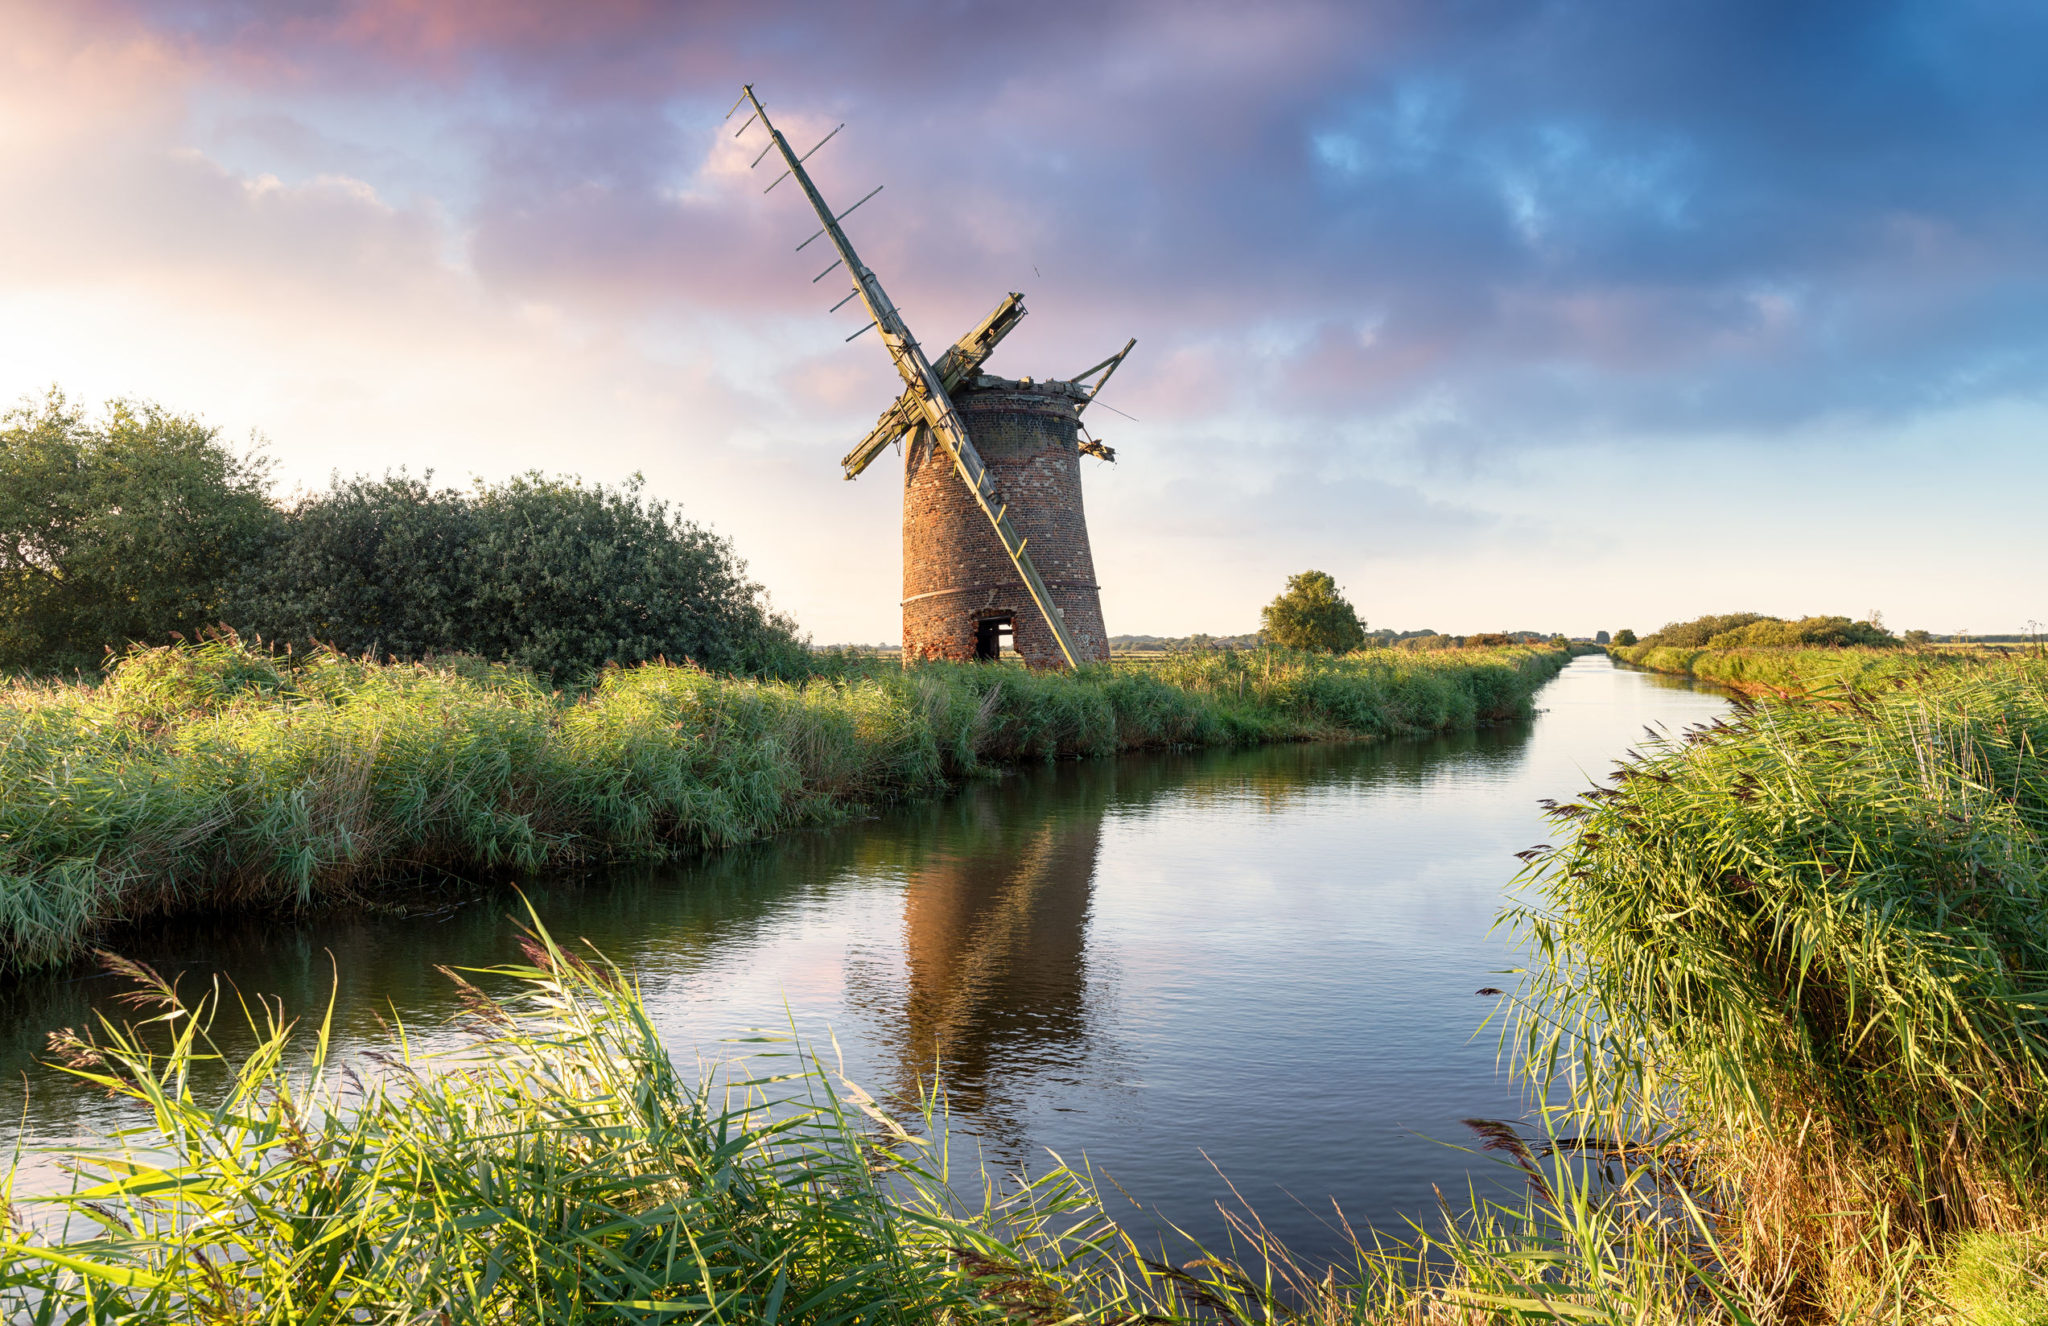 places to visit on norfolk broads